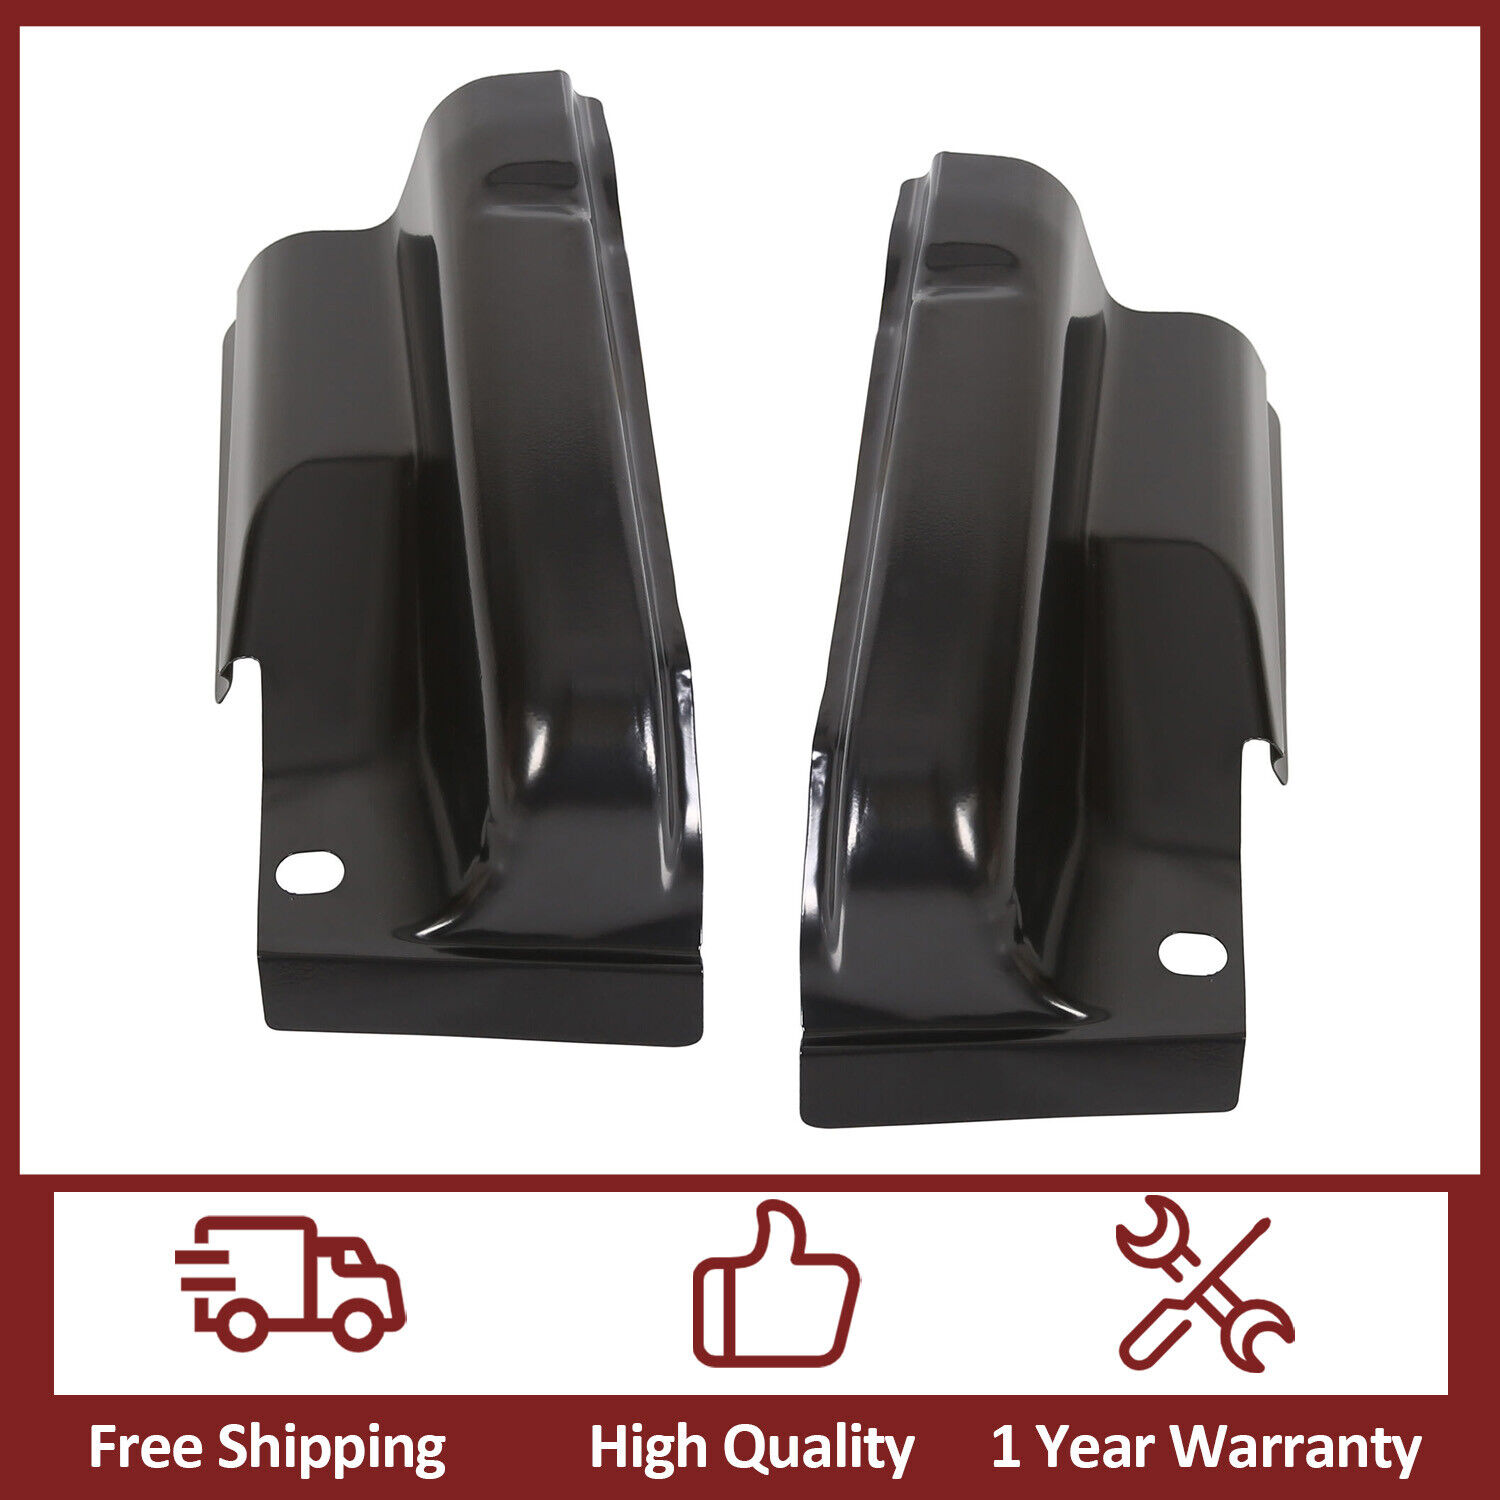 Pair Steel Outer Cab Corners For 2009-2014 Ford F-150 Pickup 4 Door Crew Cab